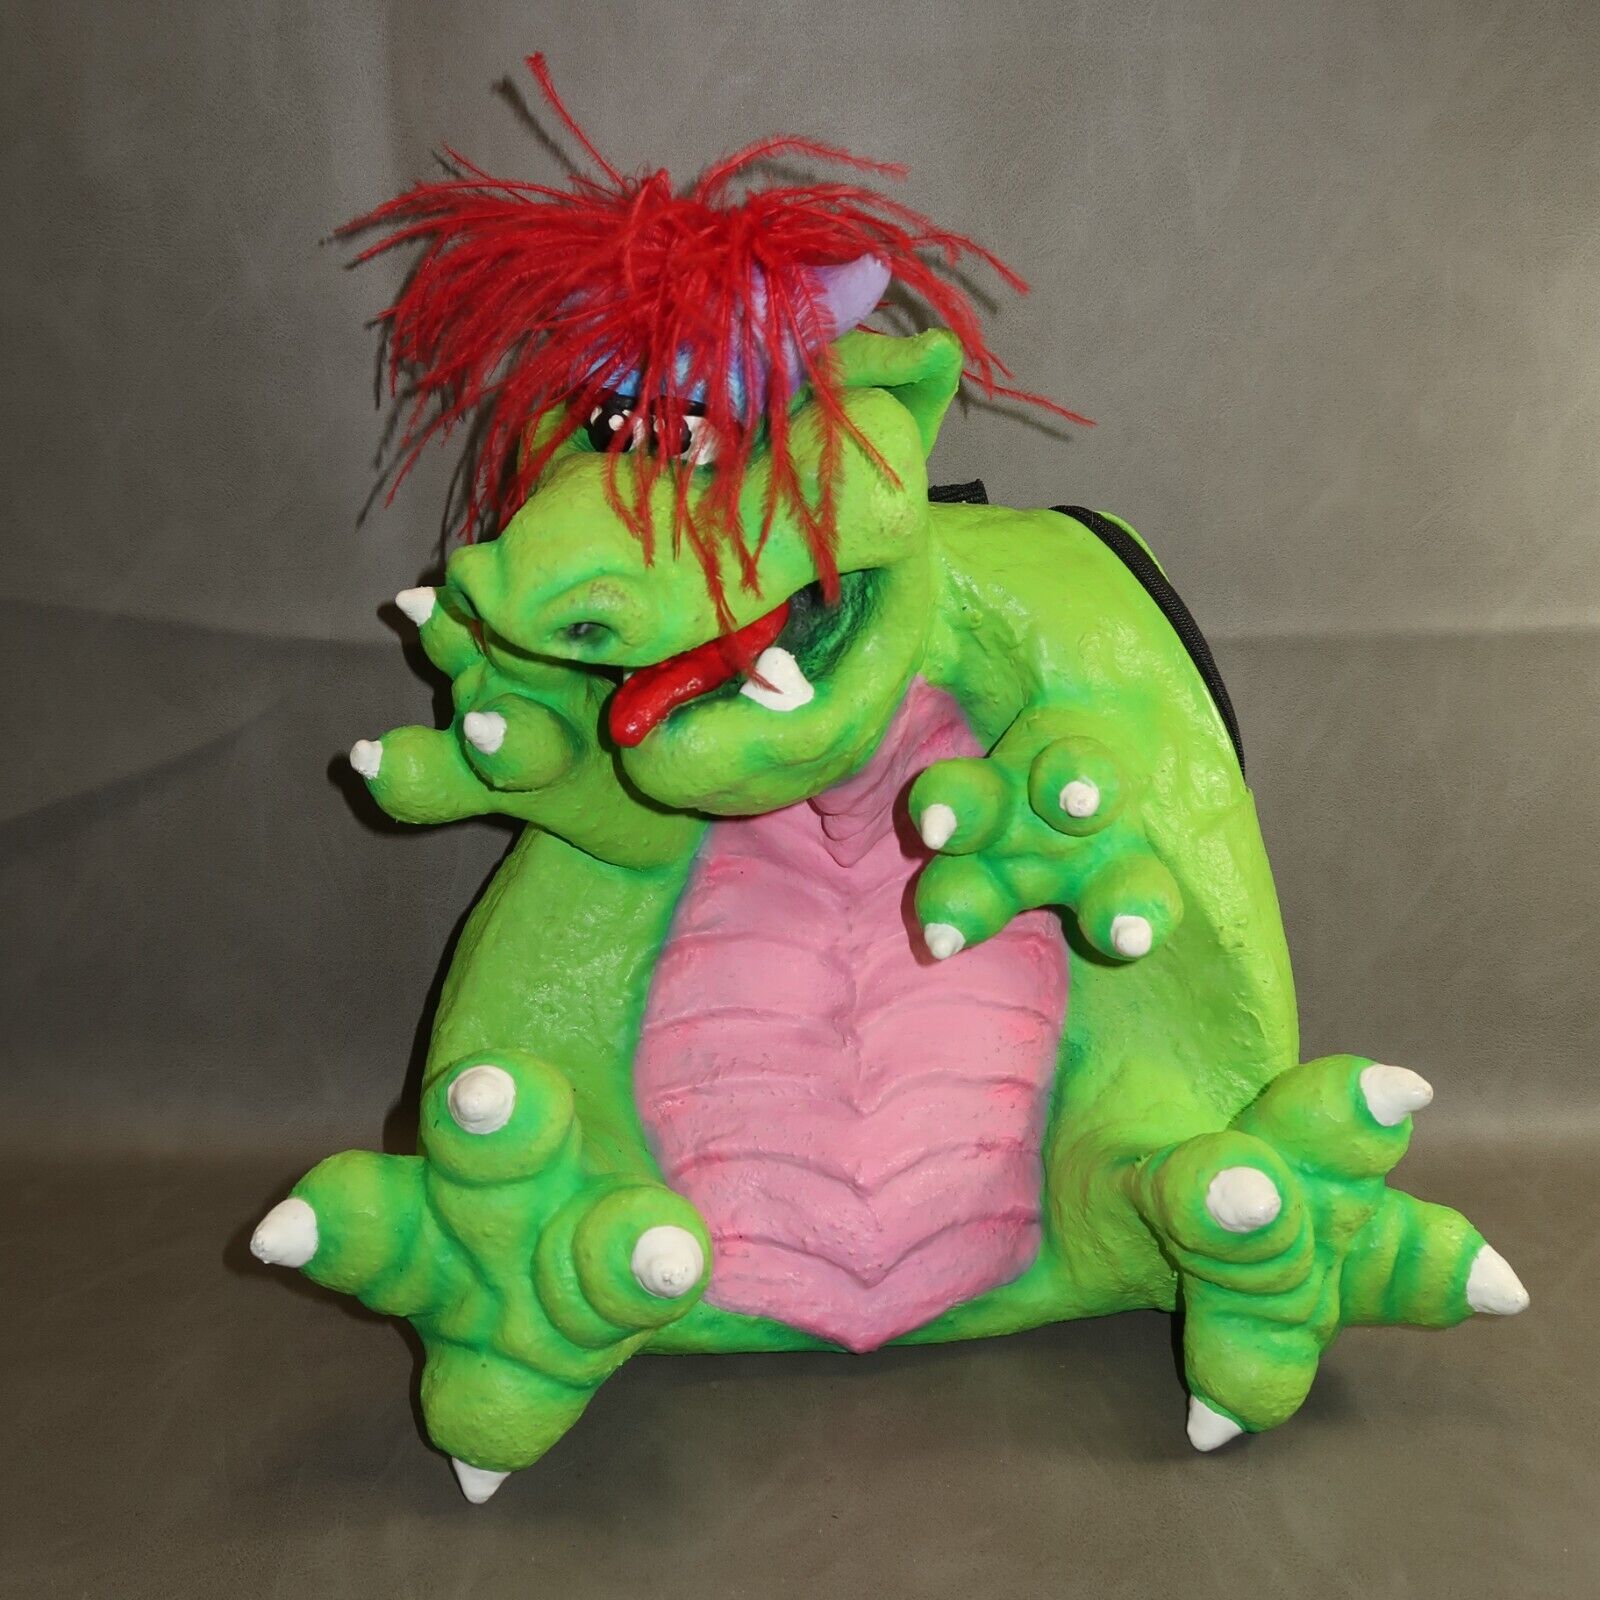 Edison the Dragon Creatures of Delight Rubber Backpack T Oliver Kopian Signed